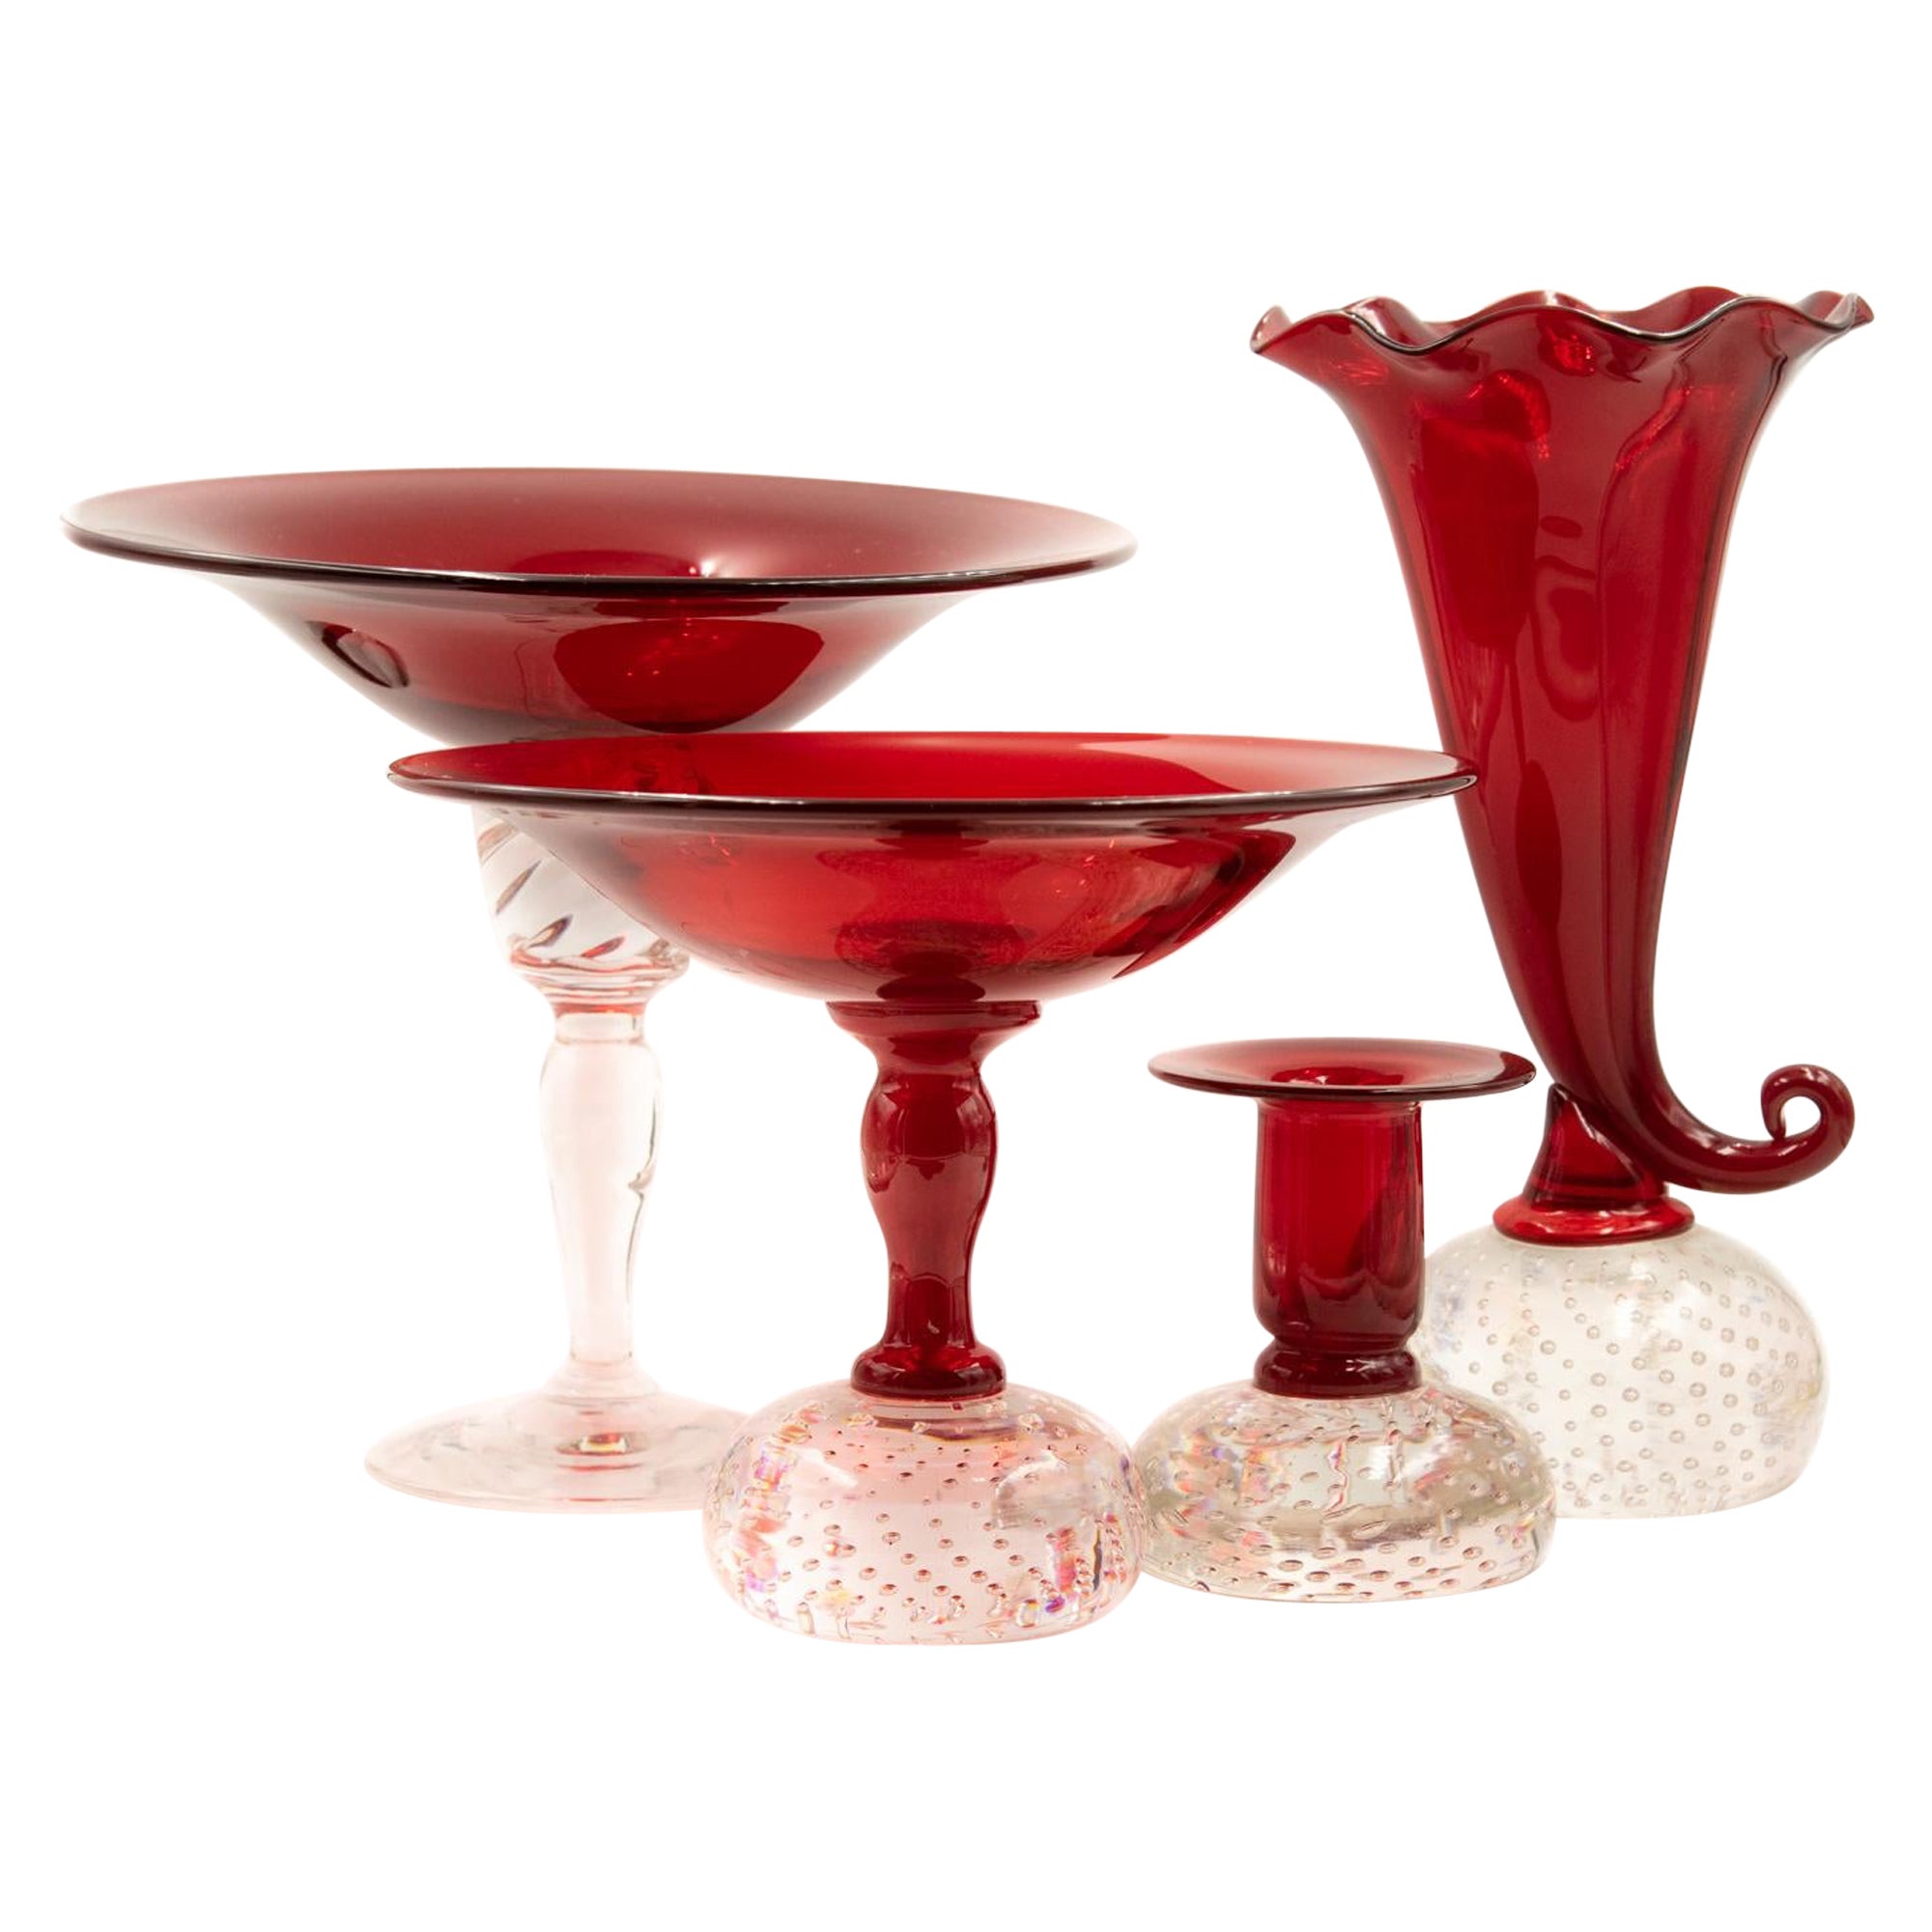 Collection of Early 20th Century Pairpoint Red Glass Vase Compotes Candle Holder